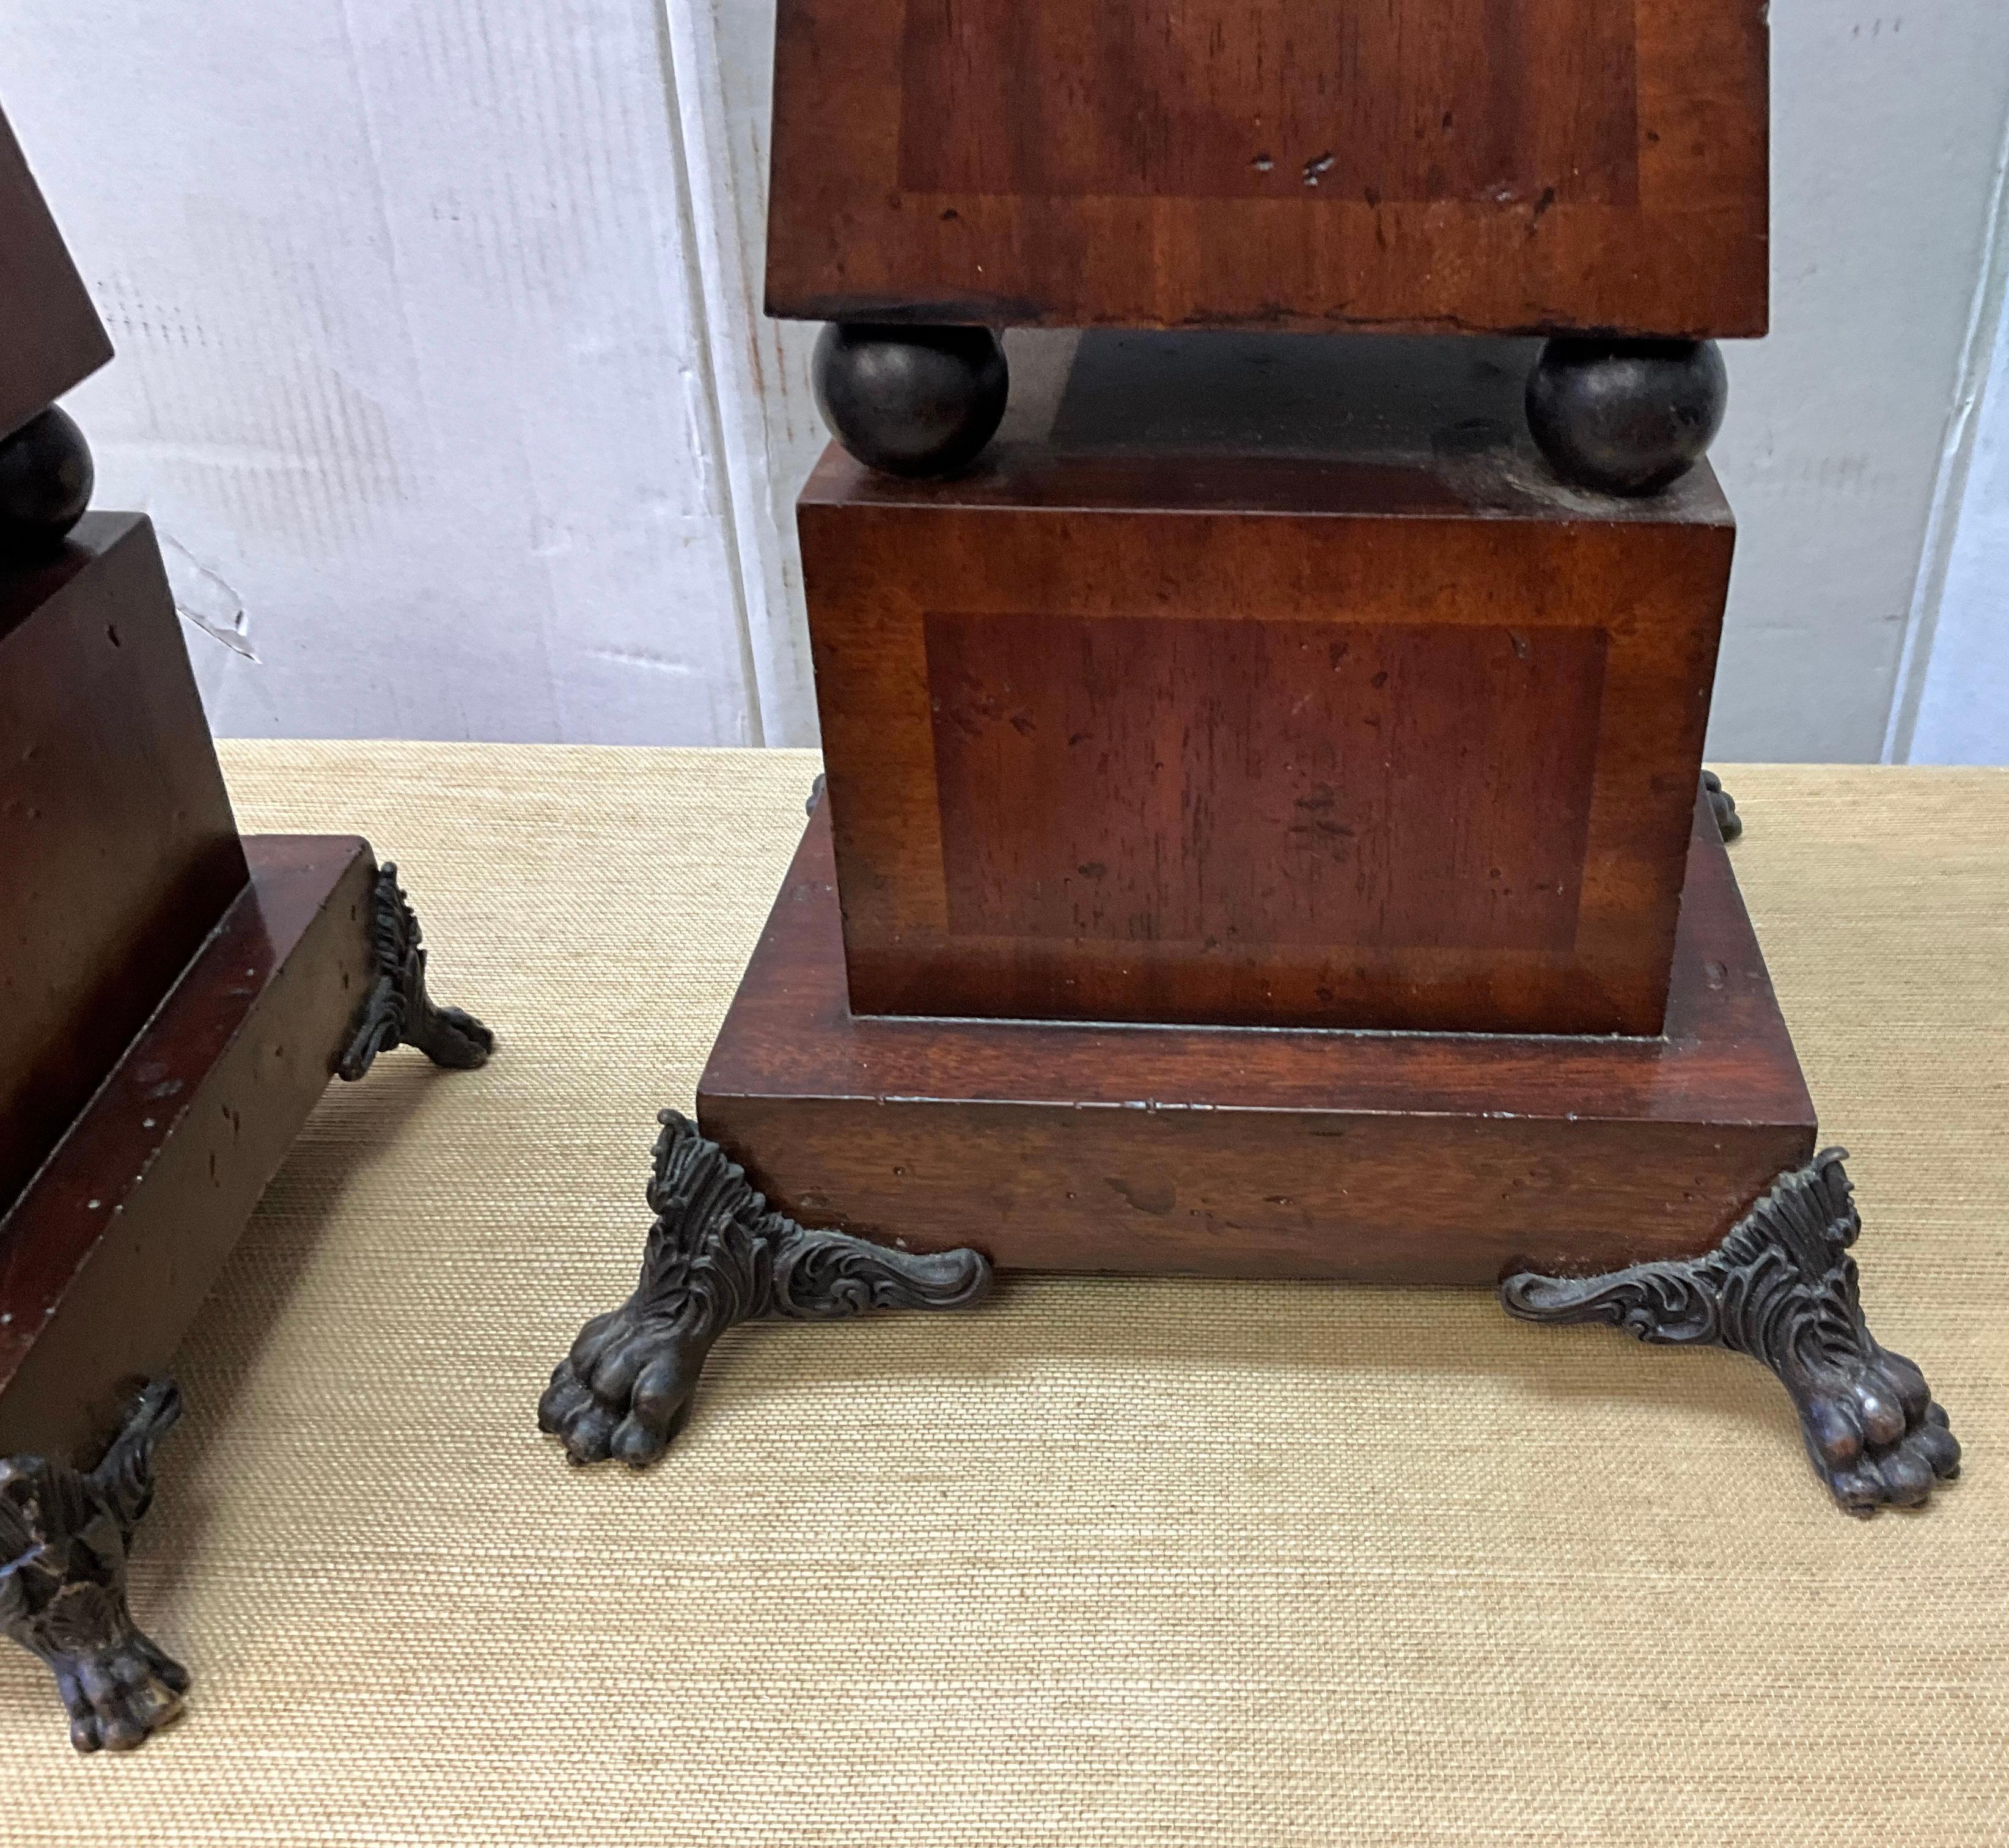 Neoclassical 20th-C. Neo-Classical style Inlaid Mahogany And Bronze Obelisks - S/2 For Sale